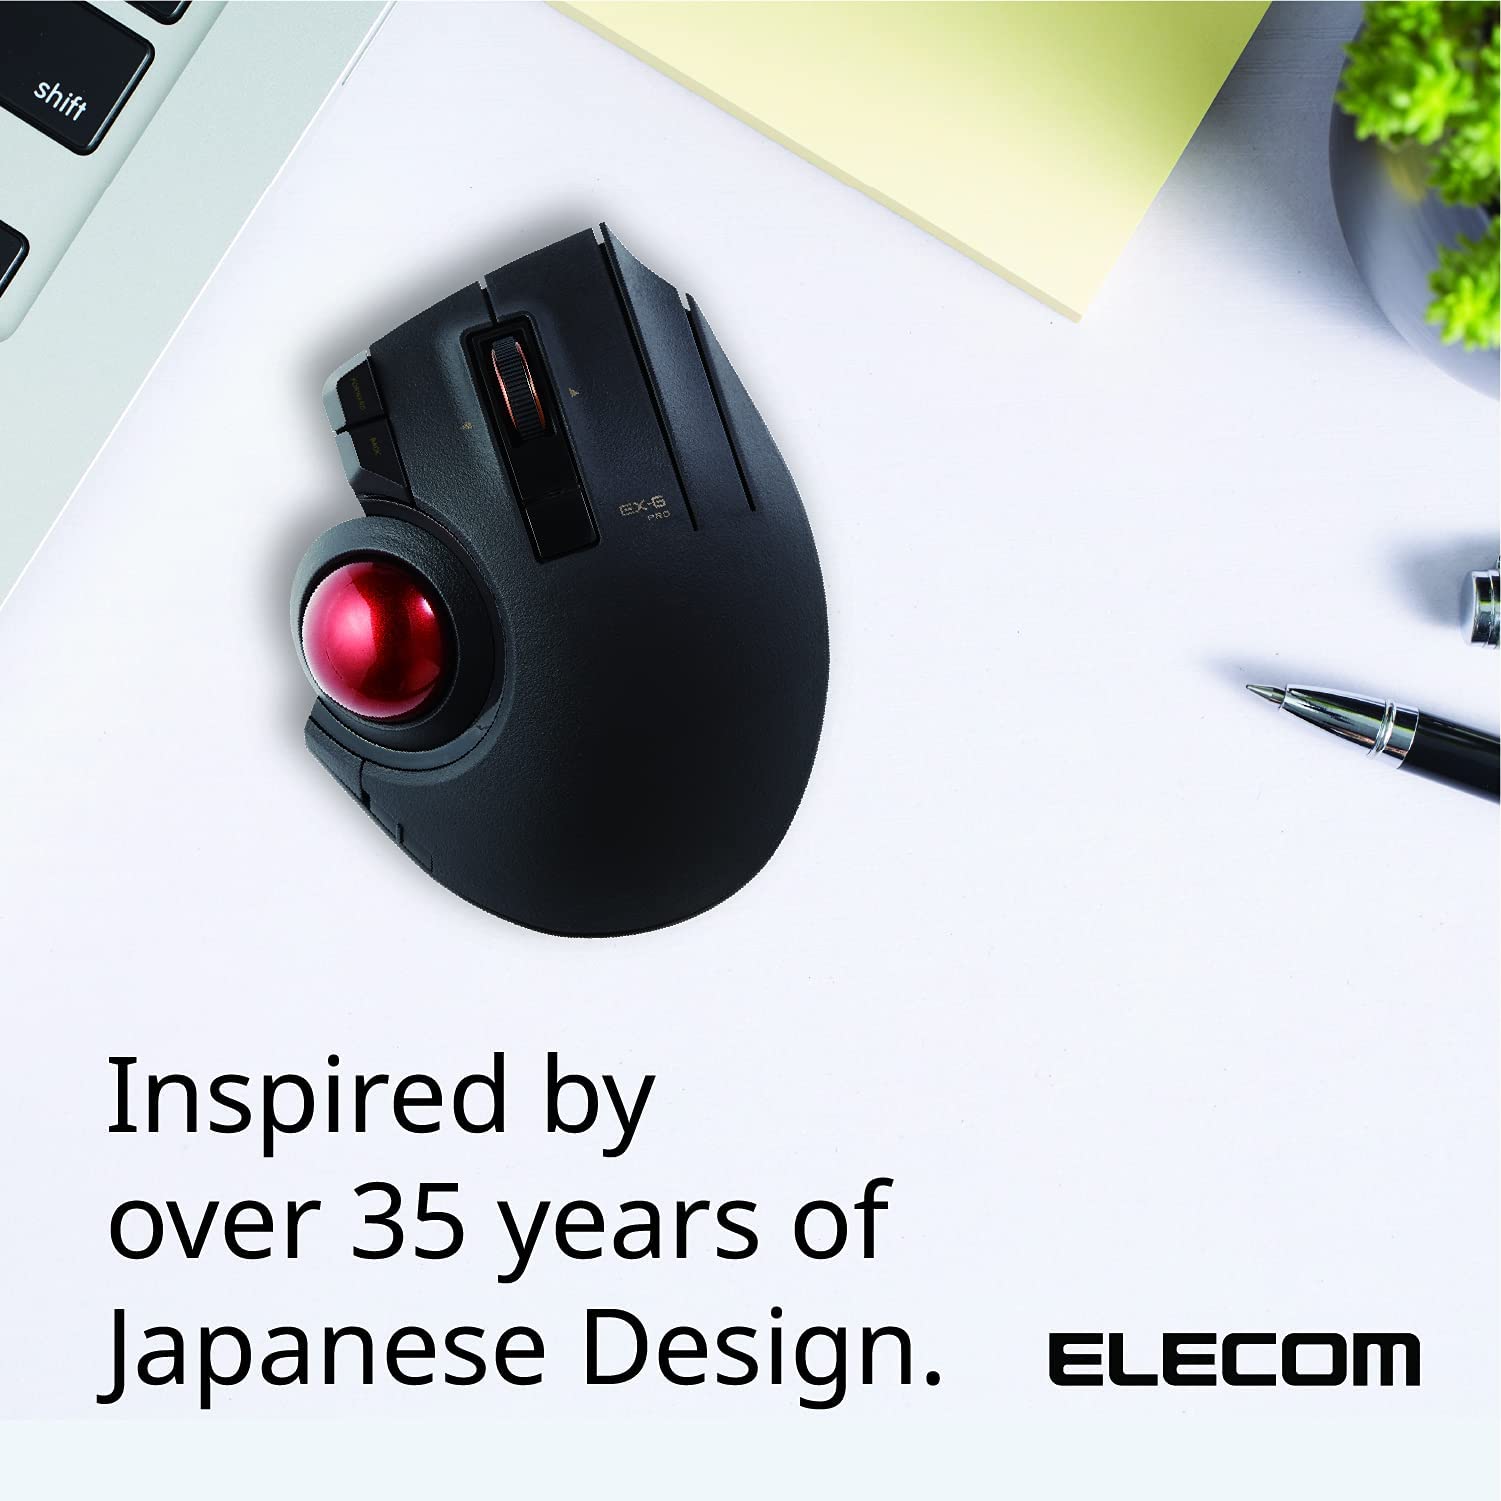 ELECOM Wired/Wireless/Bluetooth Thumb-Operated Trackball Mouse & Wired Japanese Layout Keyboard with Built-in Optical Trackball Mouse & Scroll Wheel